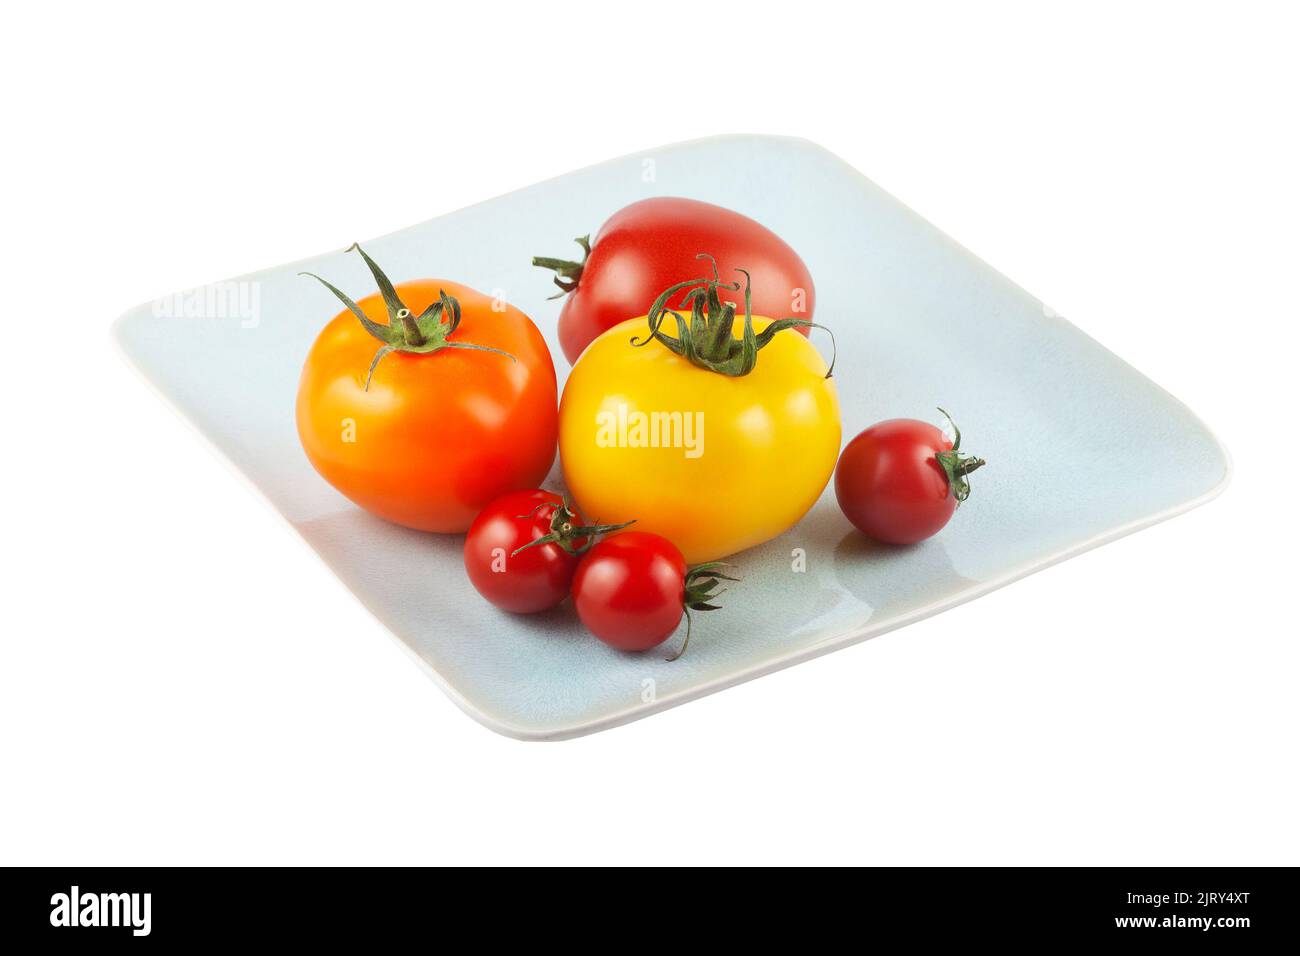 Six fresh organic tomatoes on a plate with a white background. Variety of sizes and colors: red, yellow and orange Stock Photo